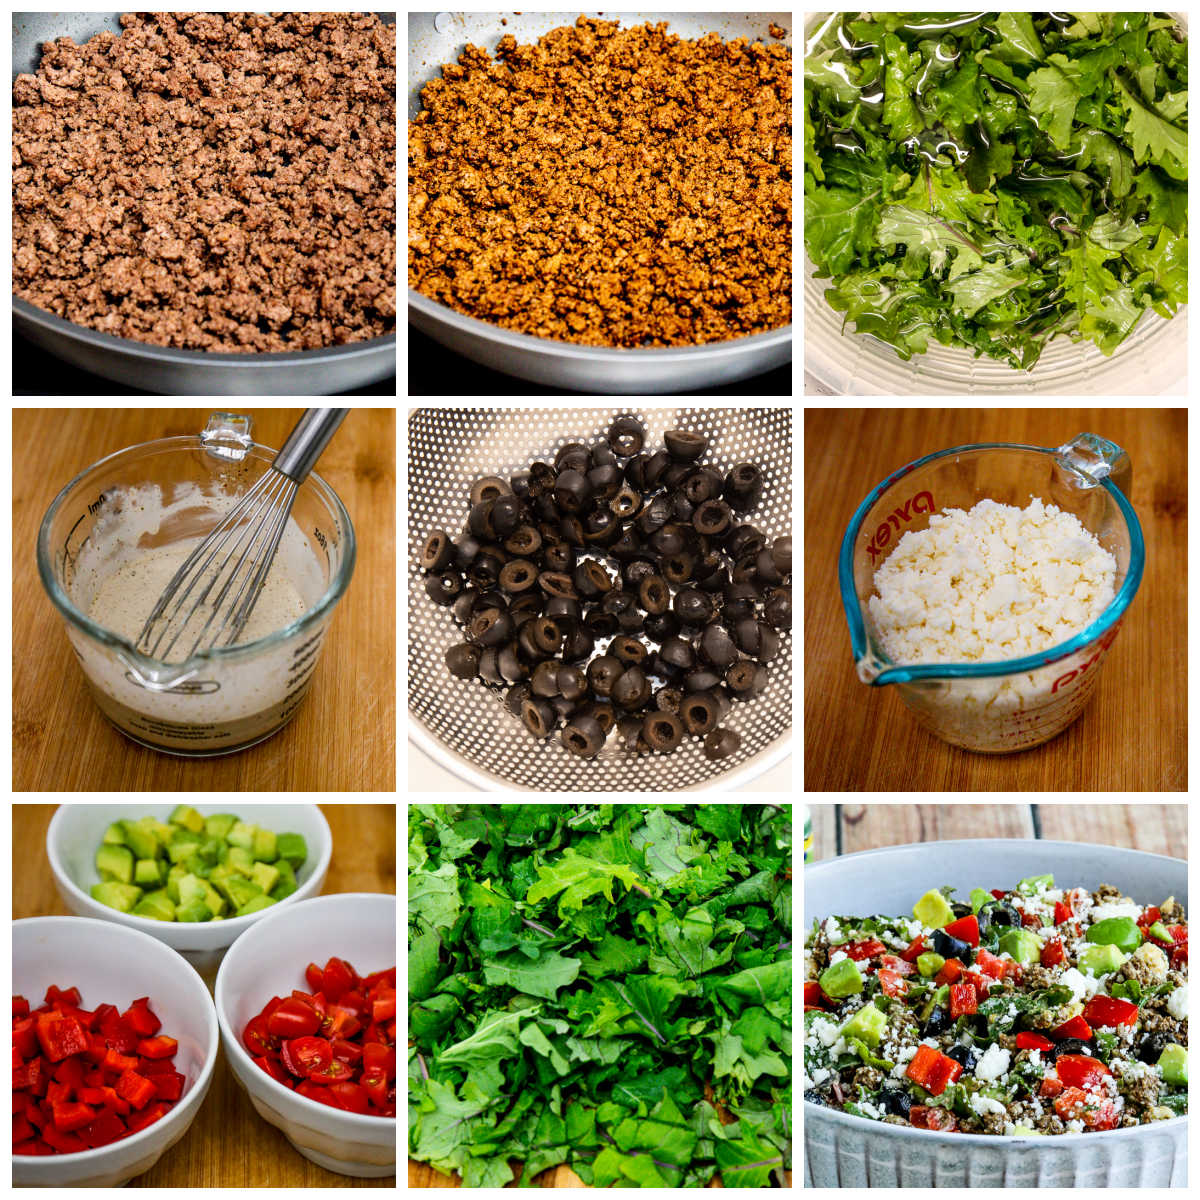 Process shots collage for Ground Beef Taco Salad with Kale, Tomatoes, and Avocado.